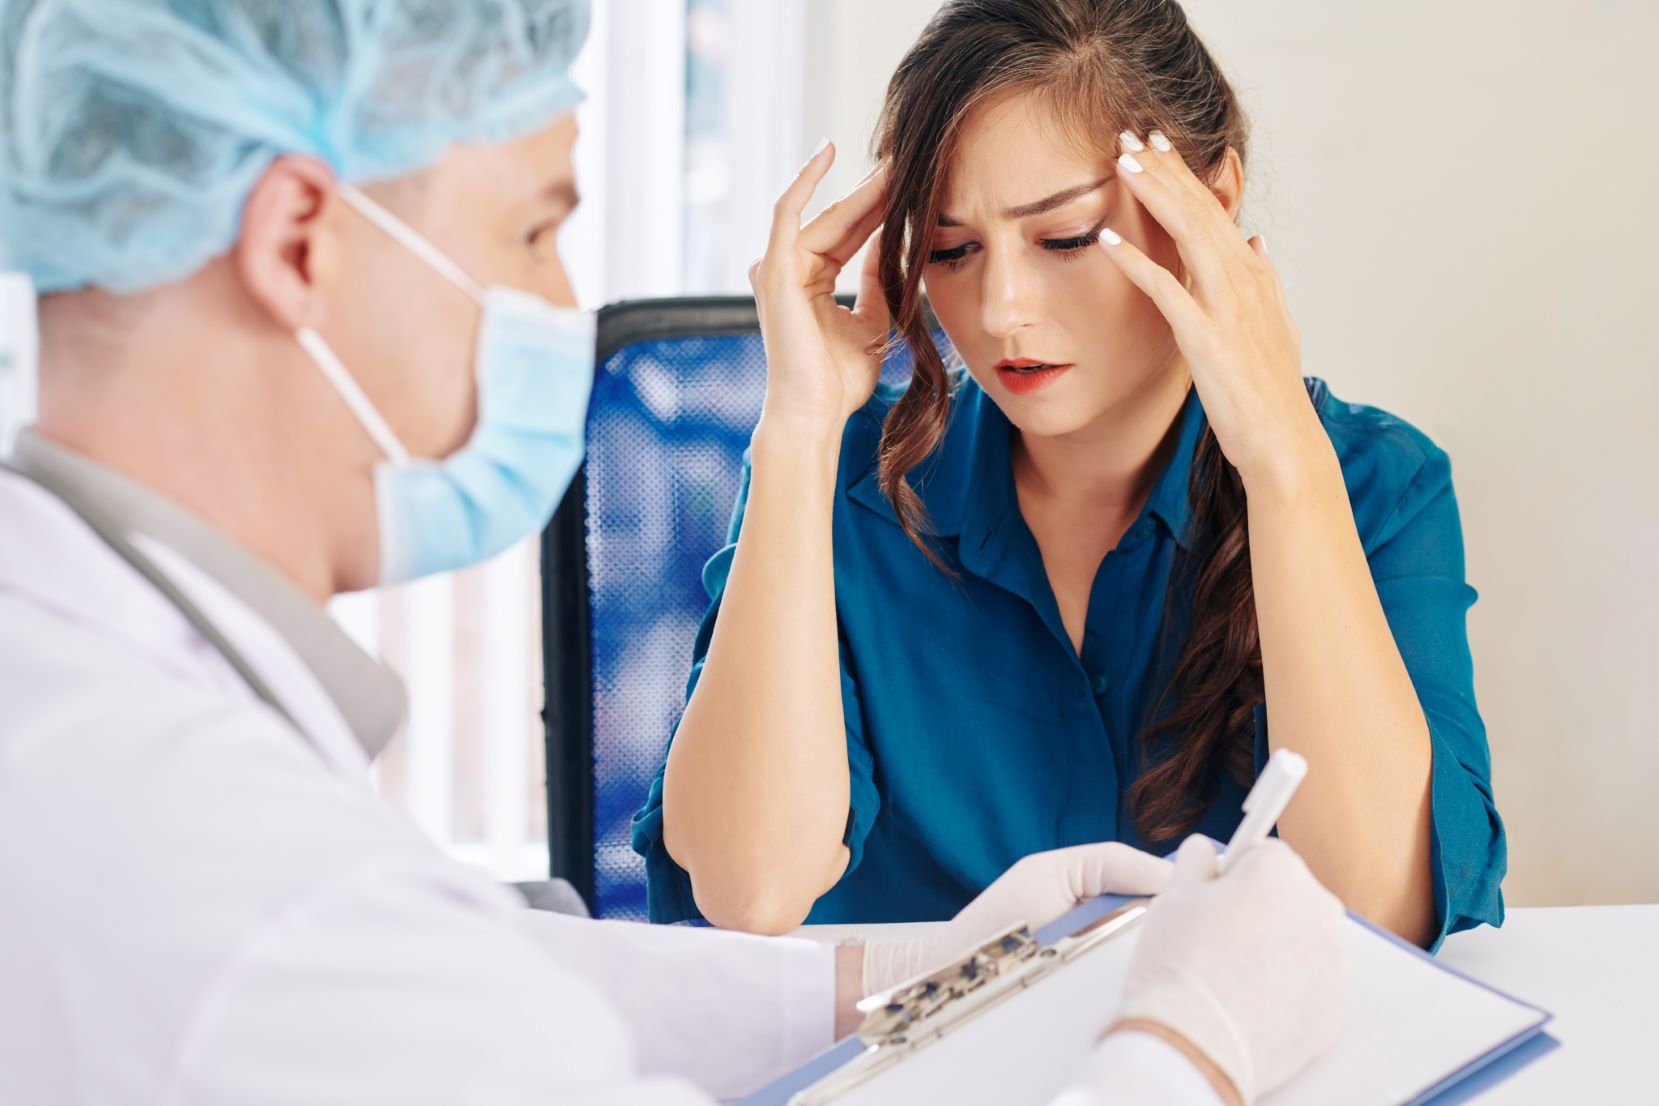 Woman suffering from severe headache seeing a doctor.